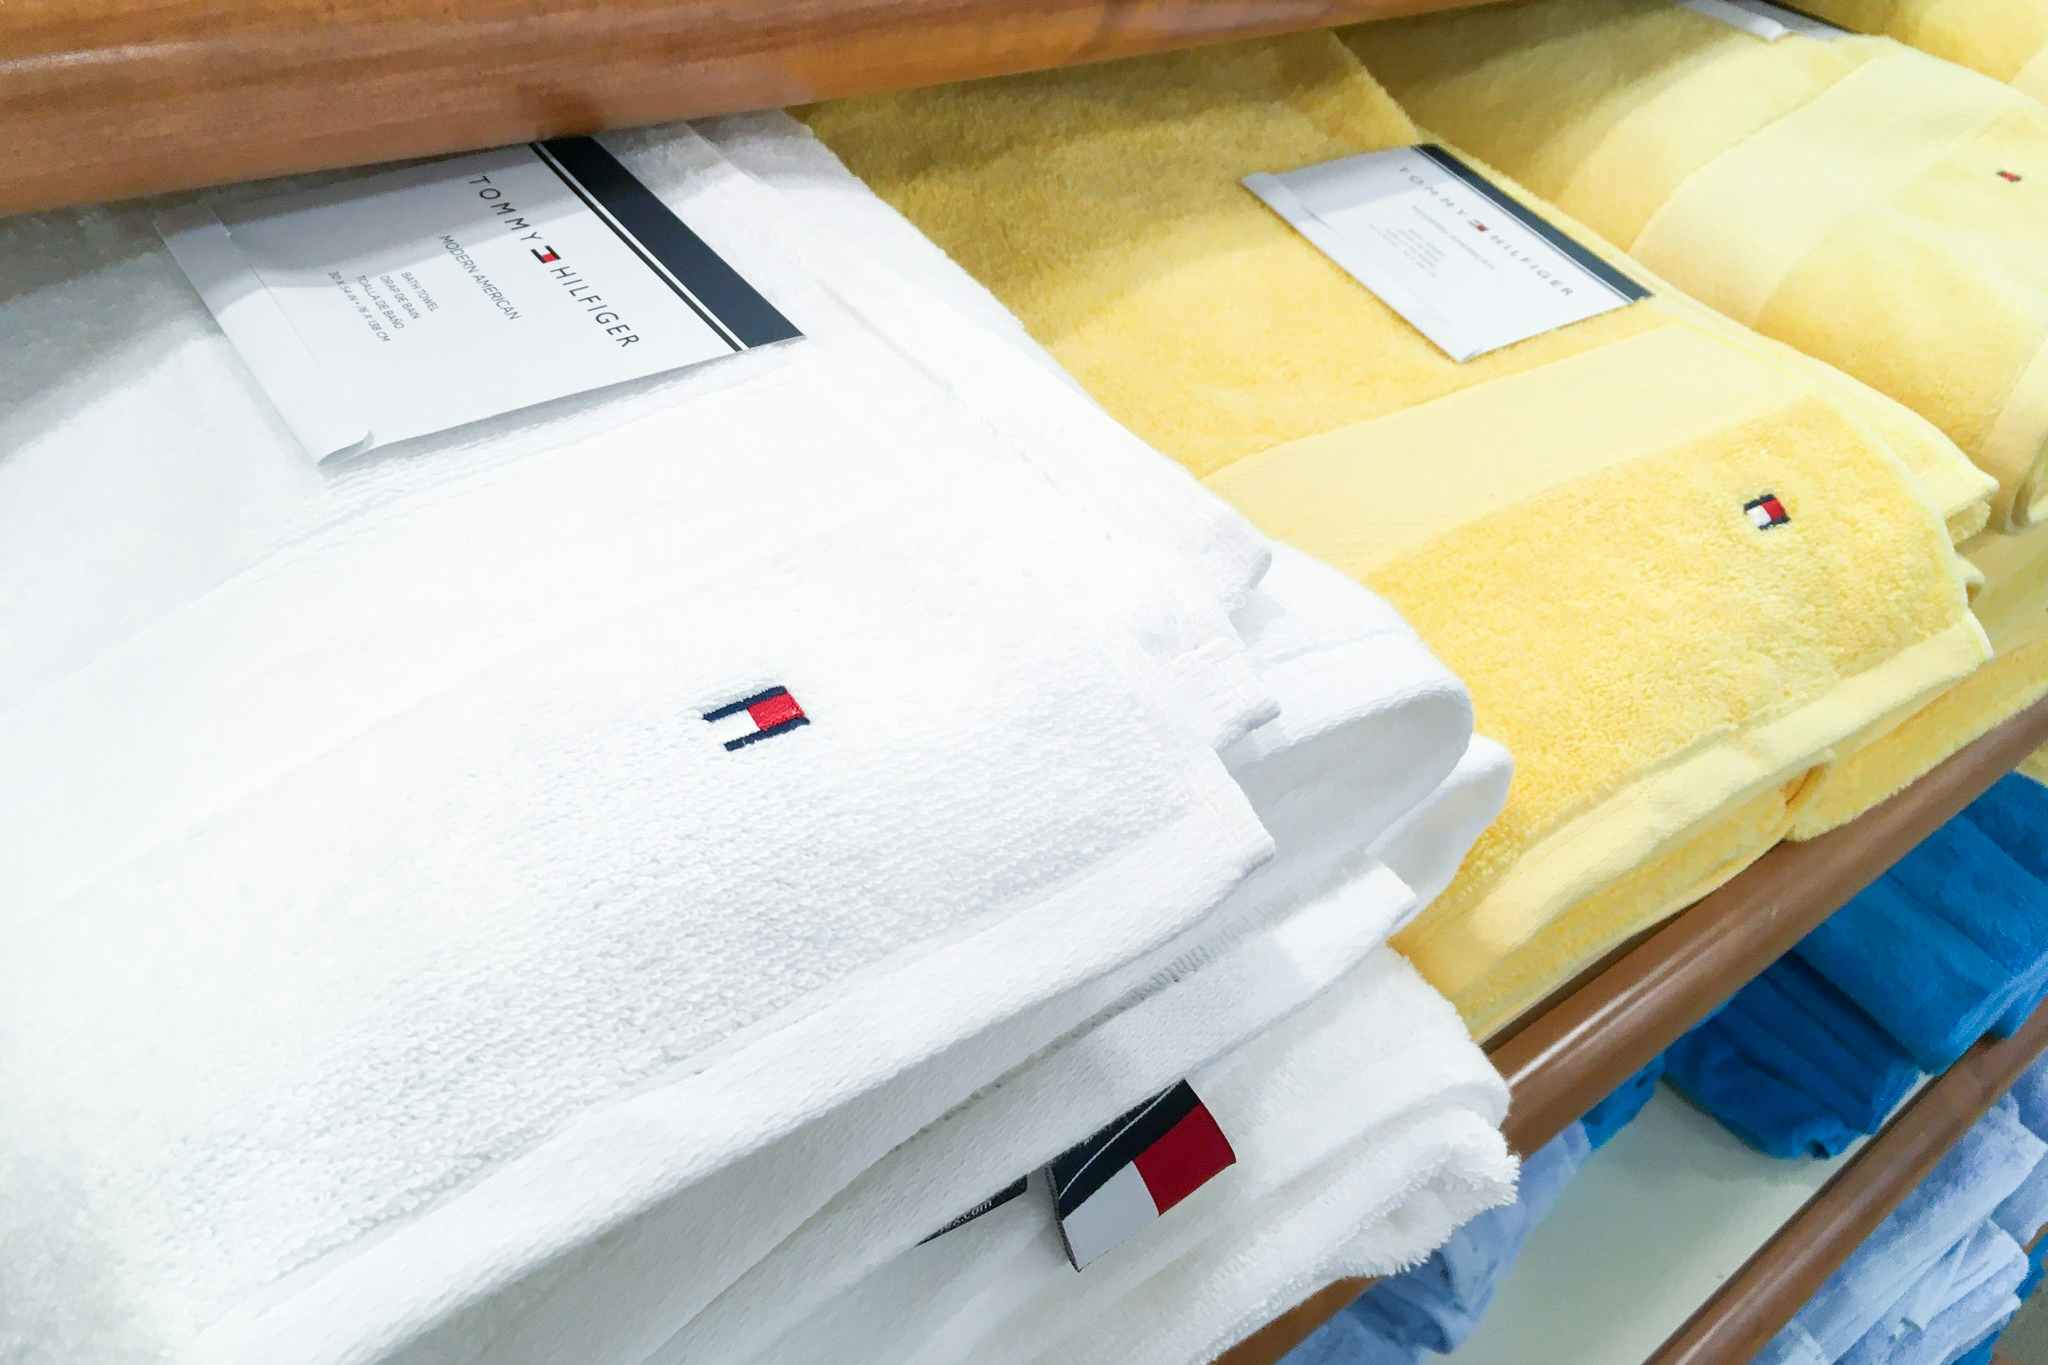 Bestselling Tommy Hilfiger Cotton Bath Towels, Only $7 at Macy's